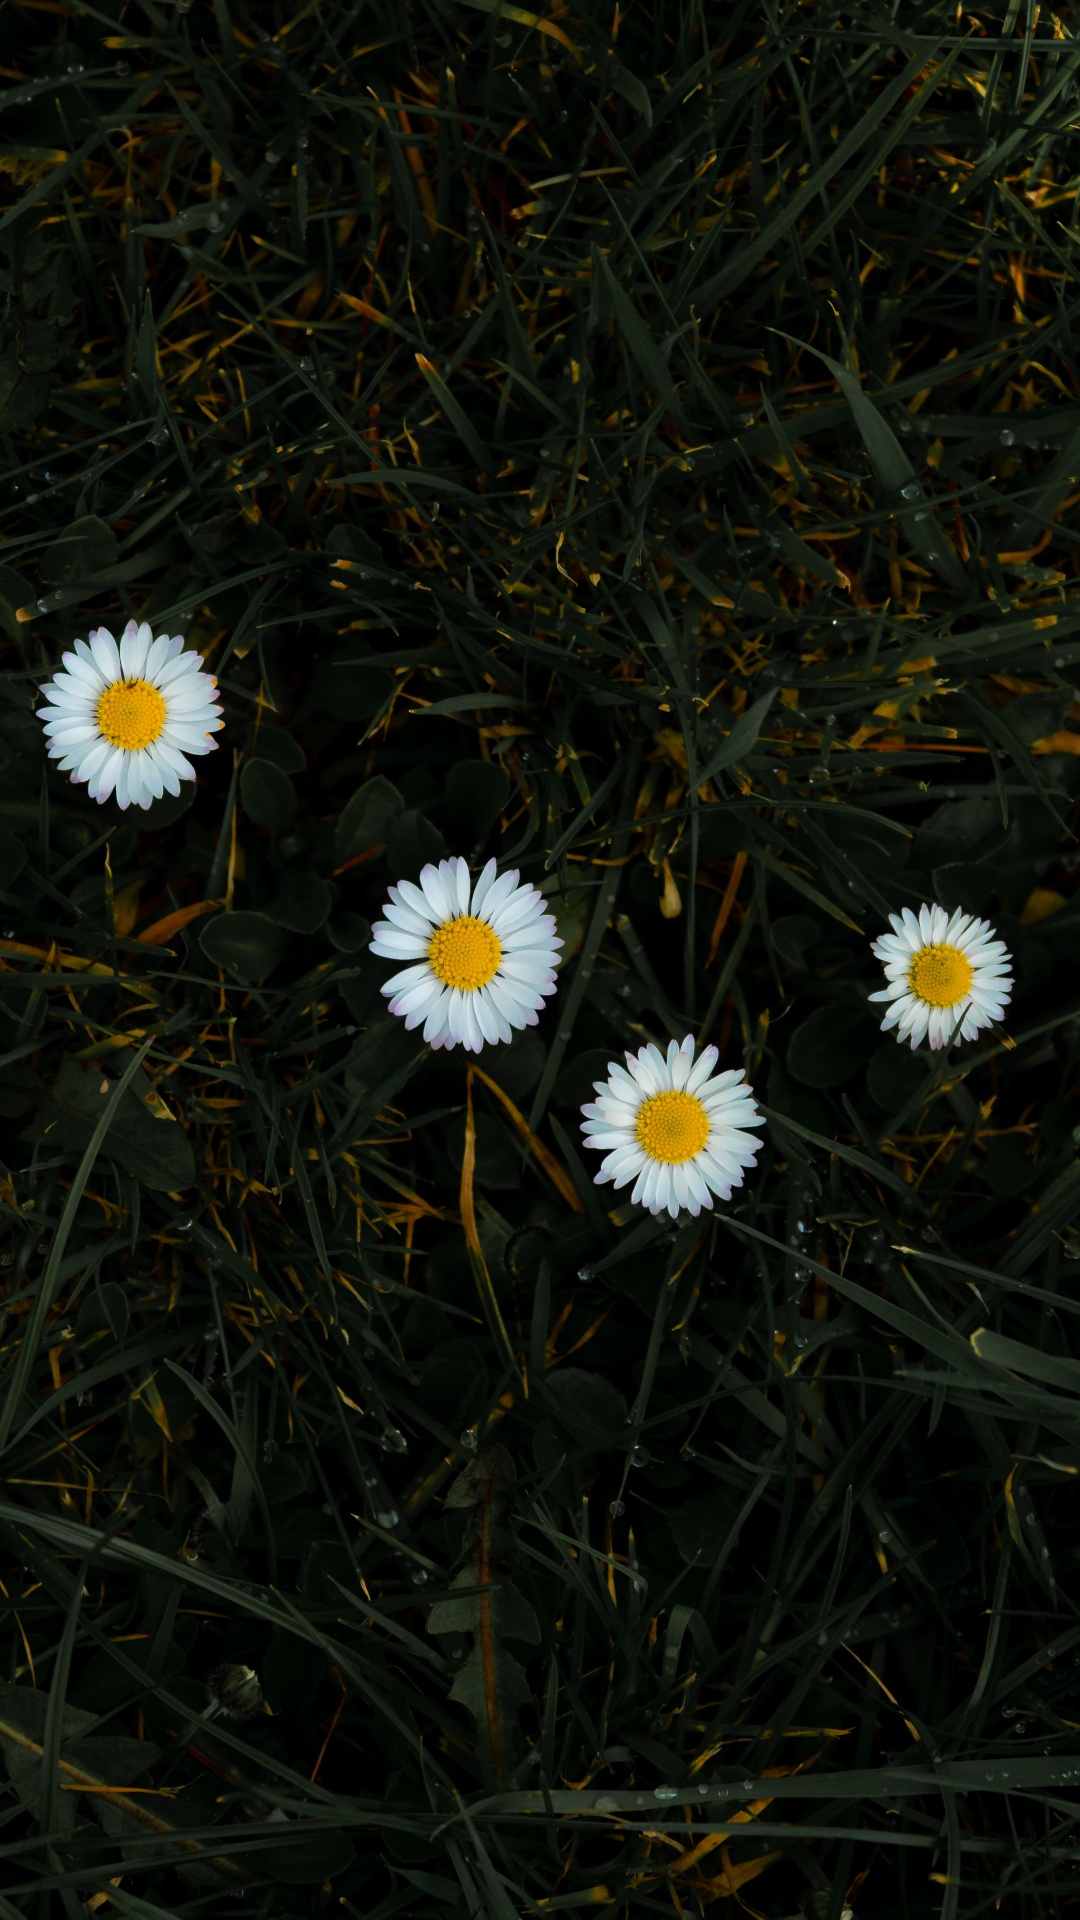 White Daisies in Bloom During Daytime. Wallpaper in 1080x1920 Resolution